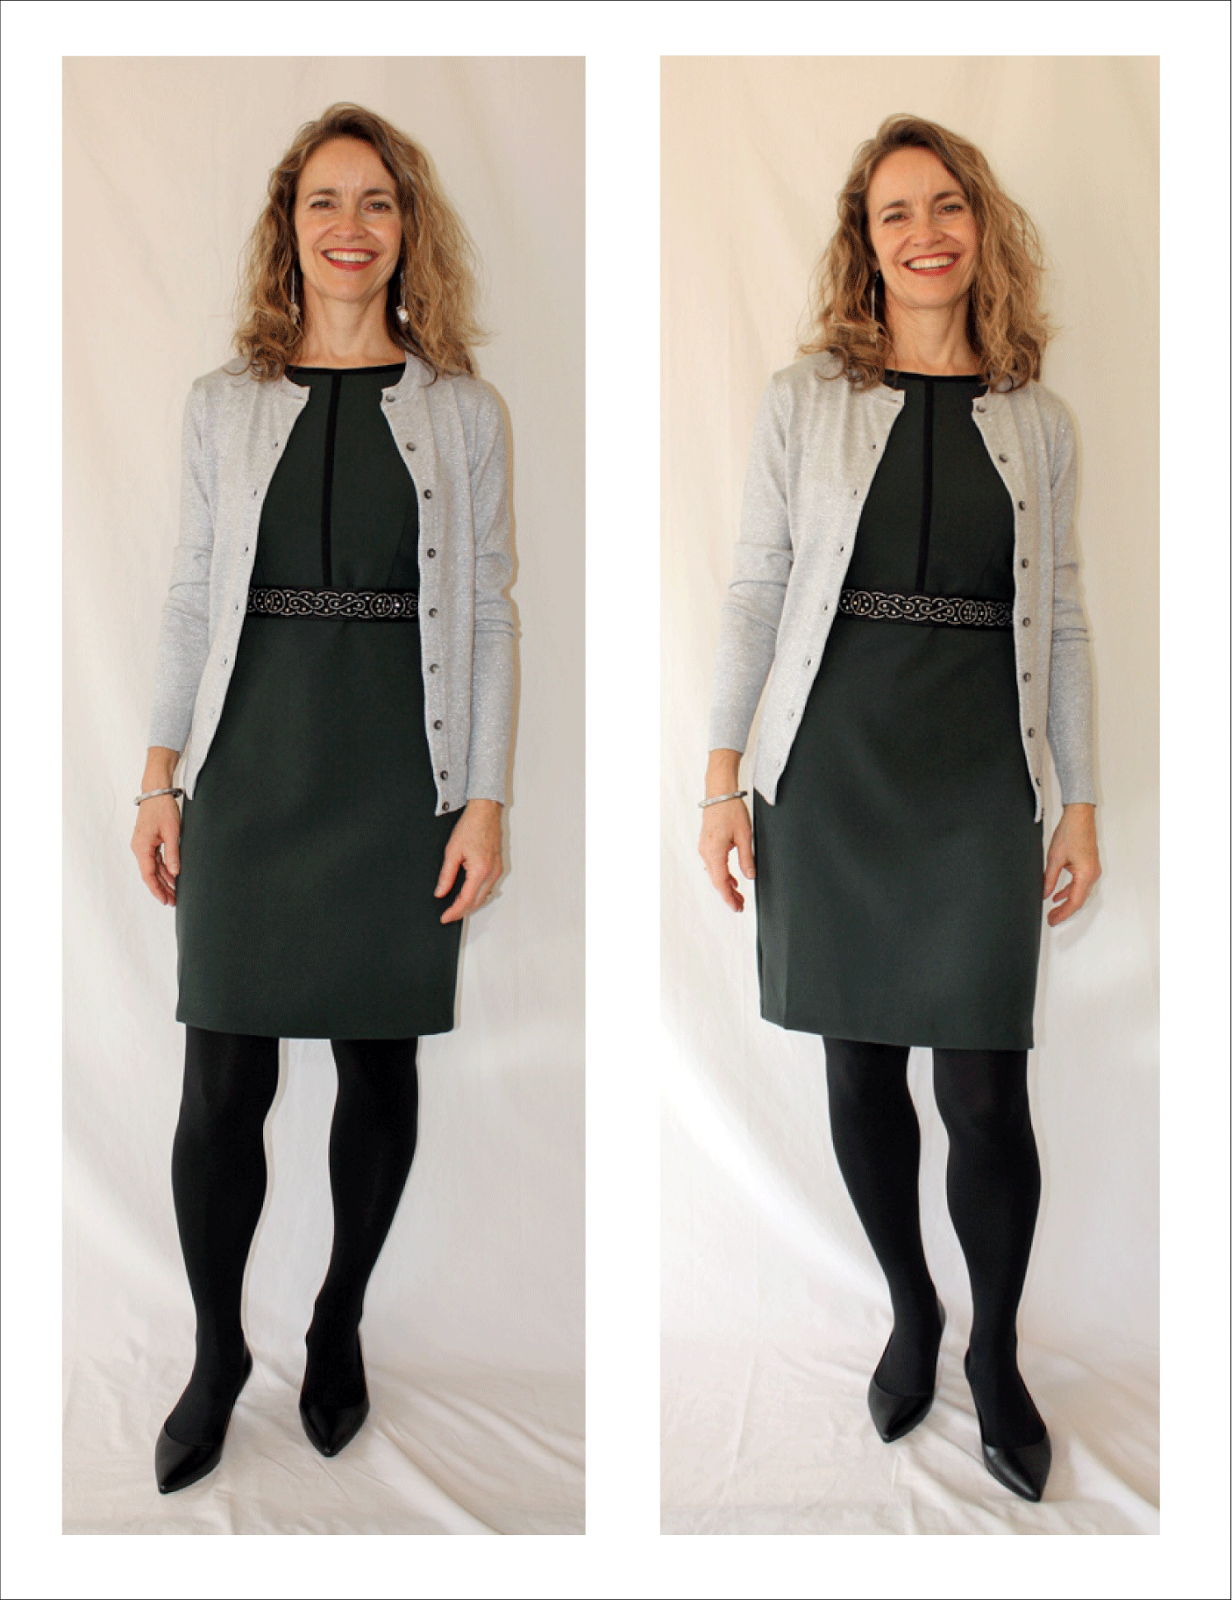 Simply Sophisticated: Holiday Outfits 9-12: The Holiday Sheath